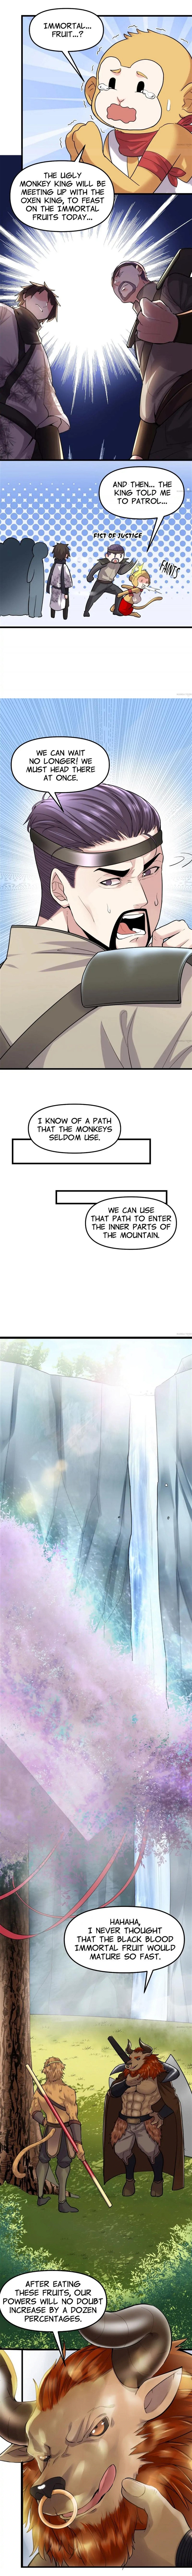 Cultivation, Kidding Me?! - Page 2